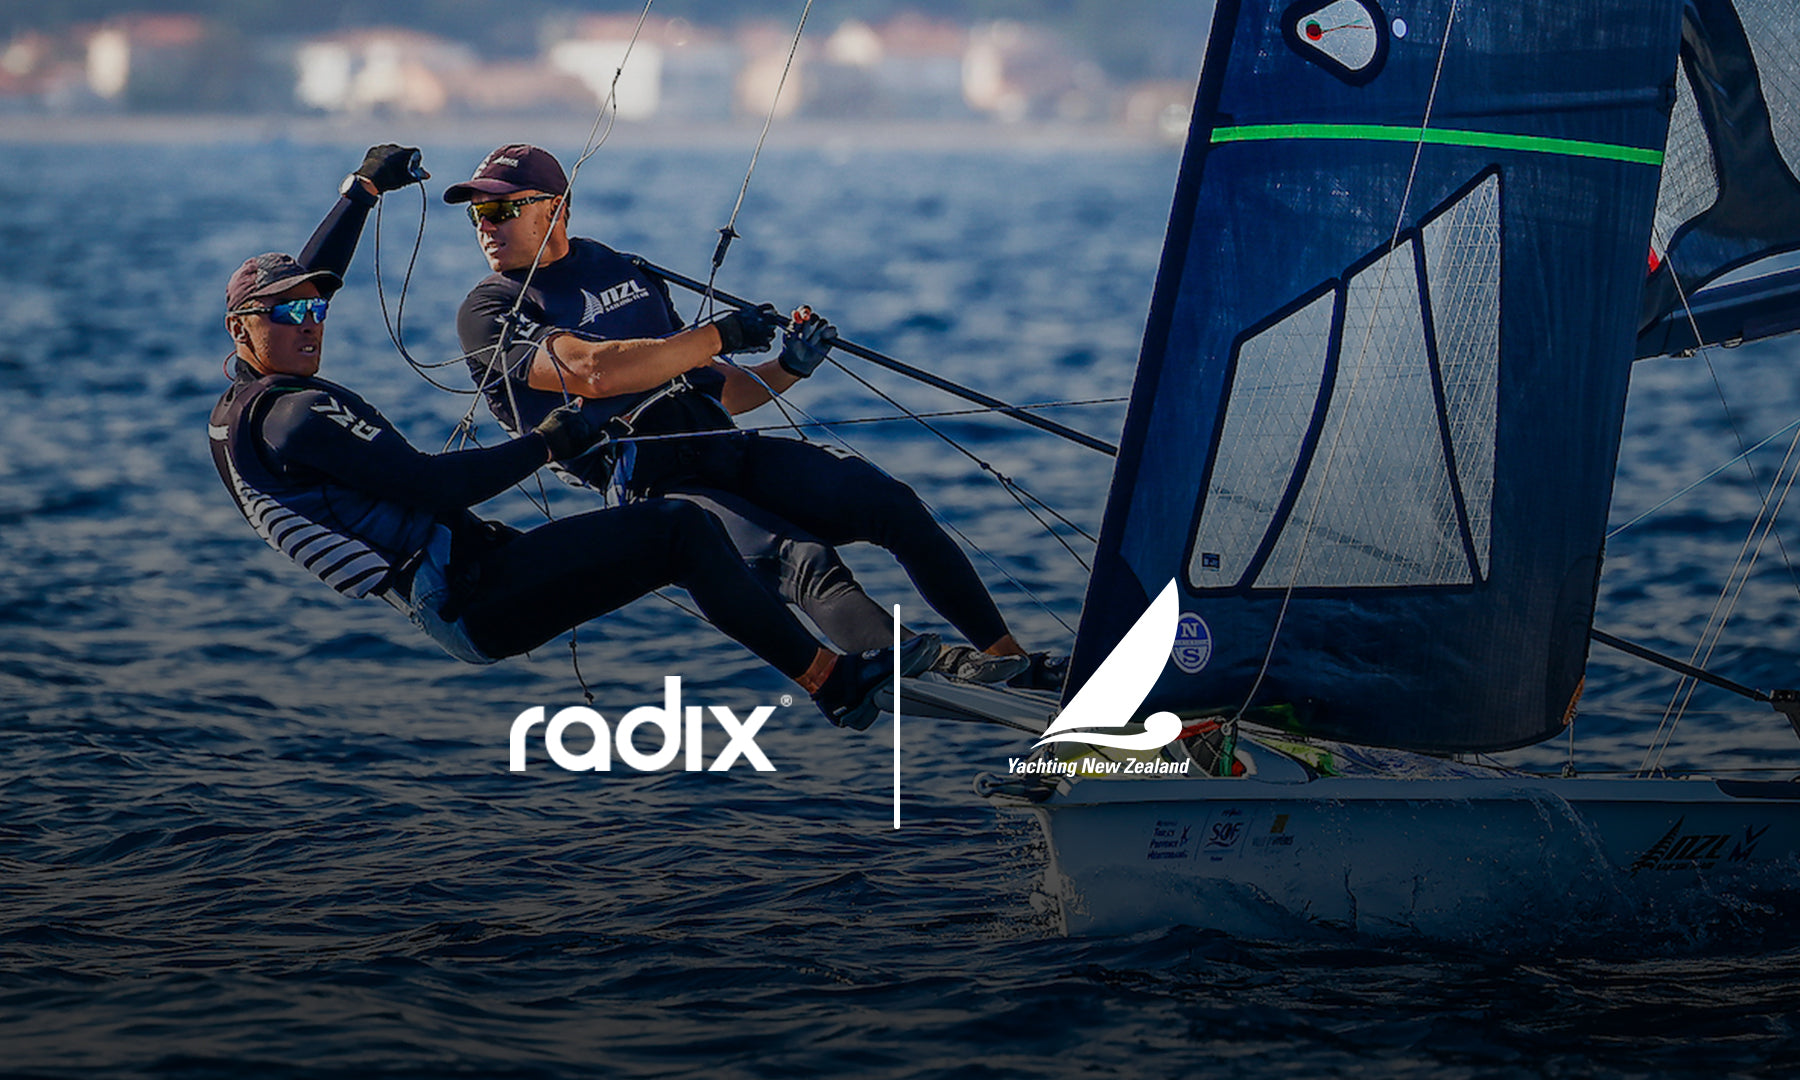 Fuelling champions: Yachting NZ, Radix Nutrition join forces